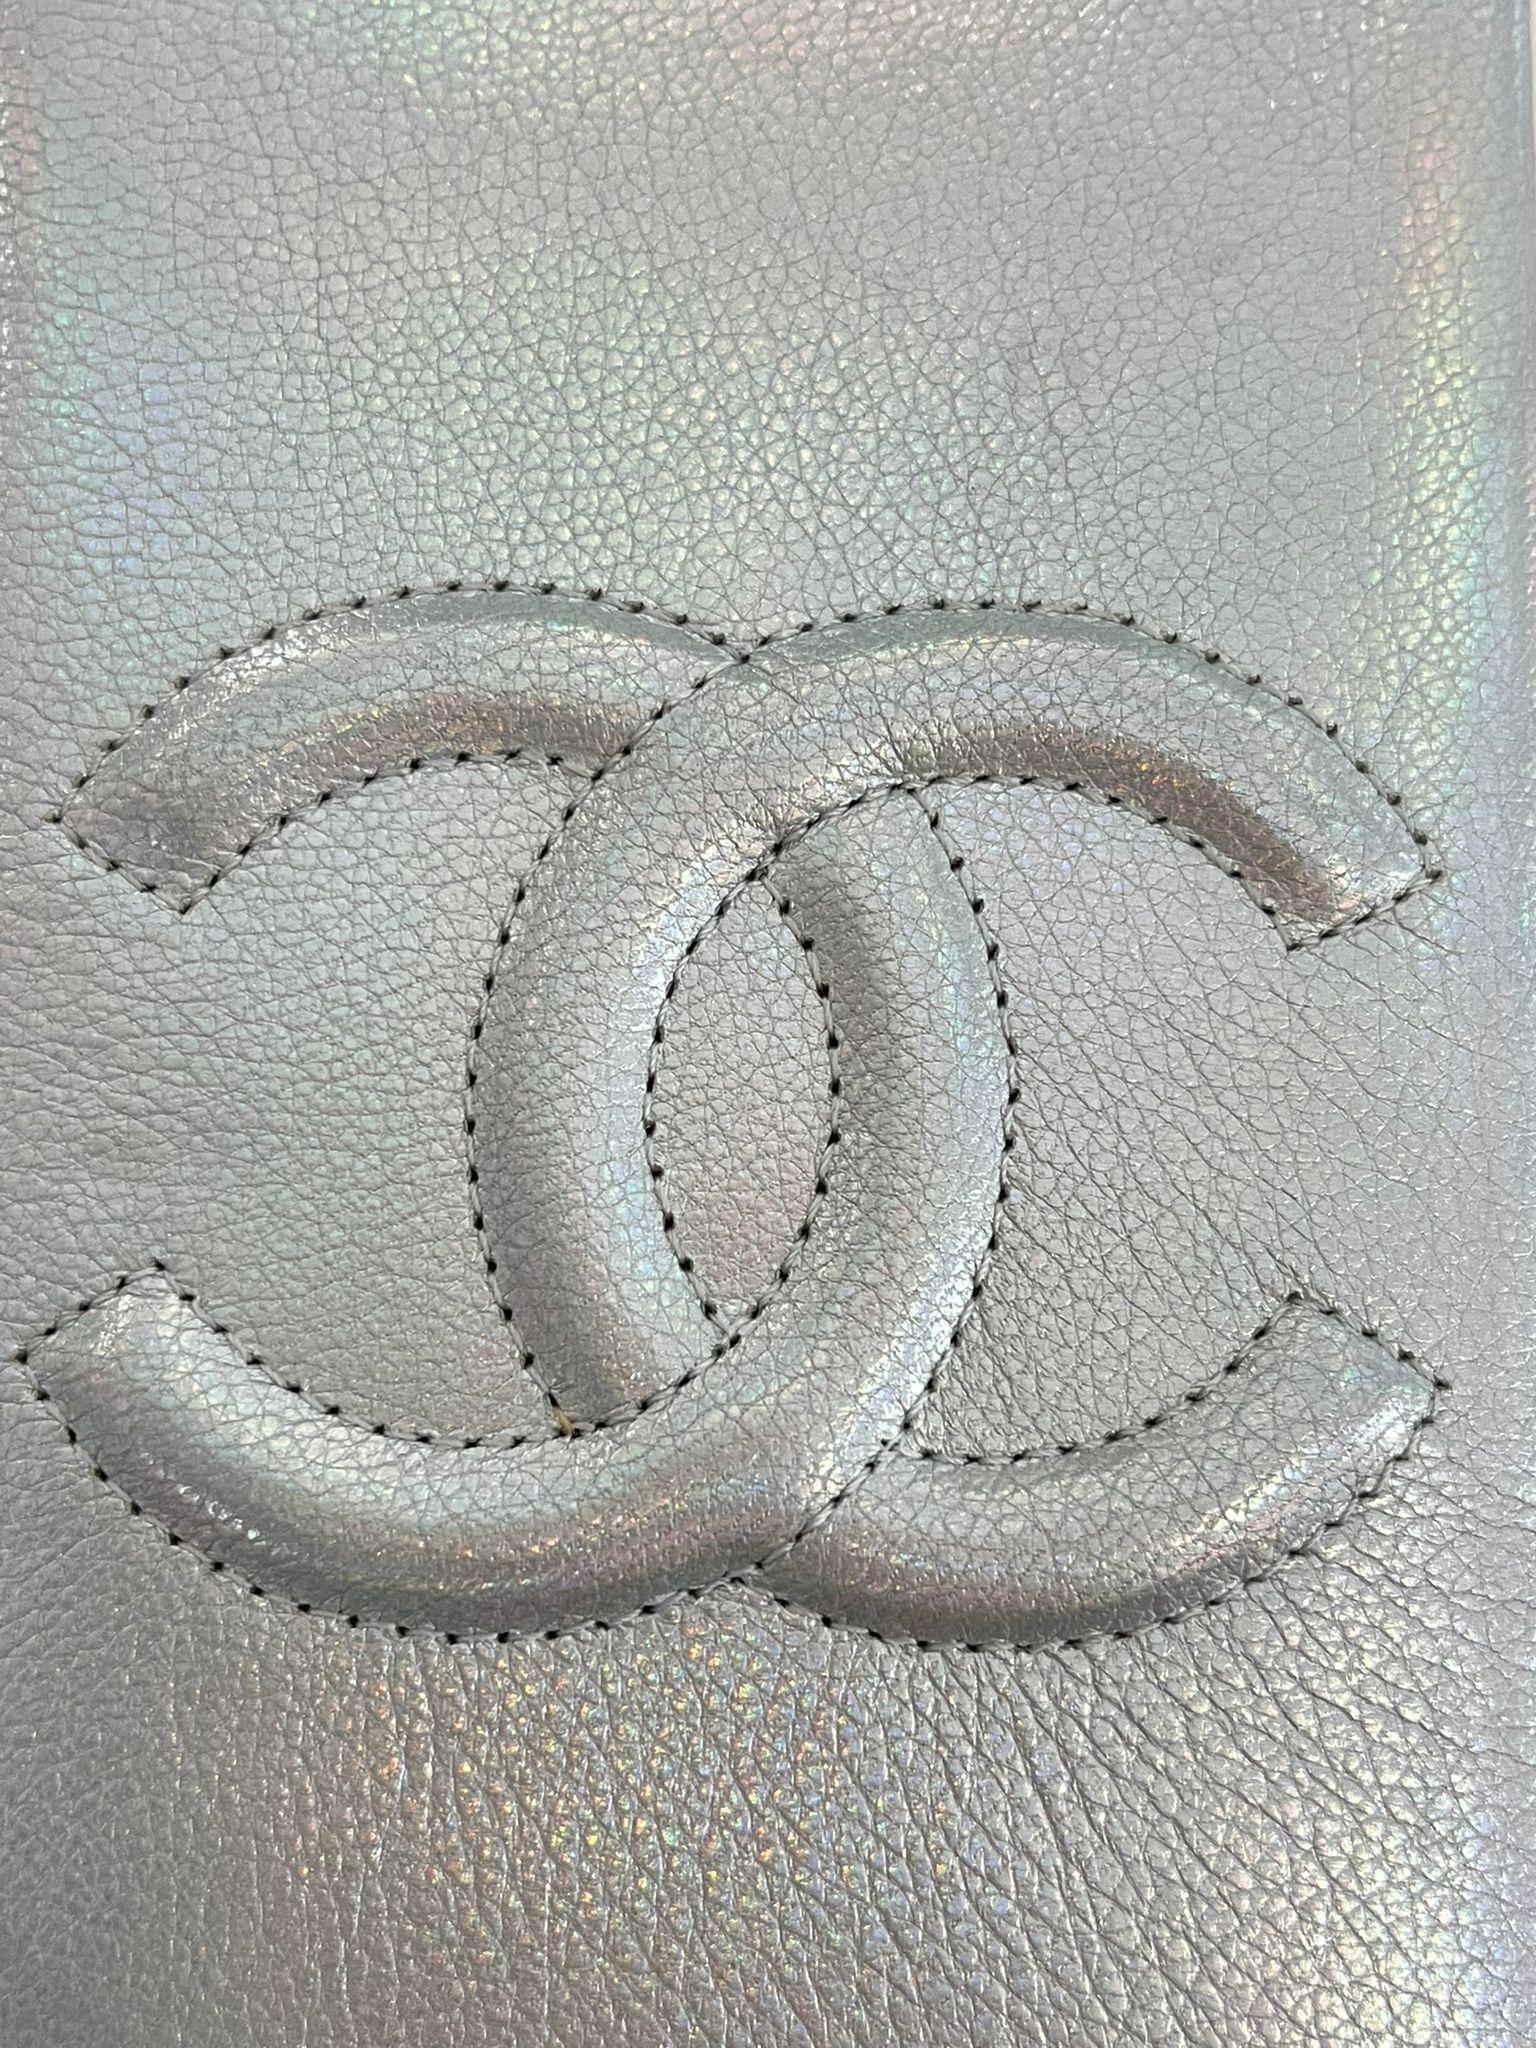 Chanel Iridescent Leather Milk Carton Handbag From The Supermarket Collection 1